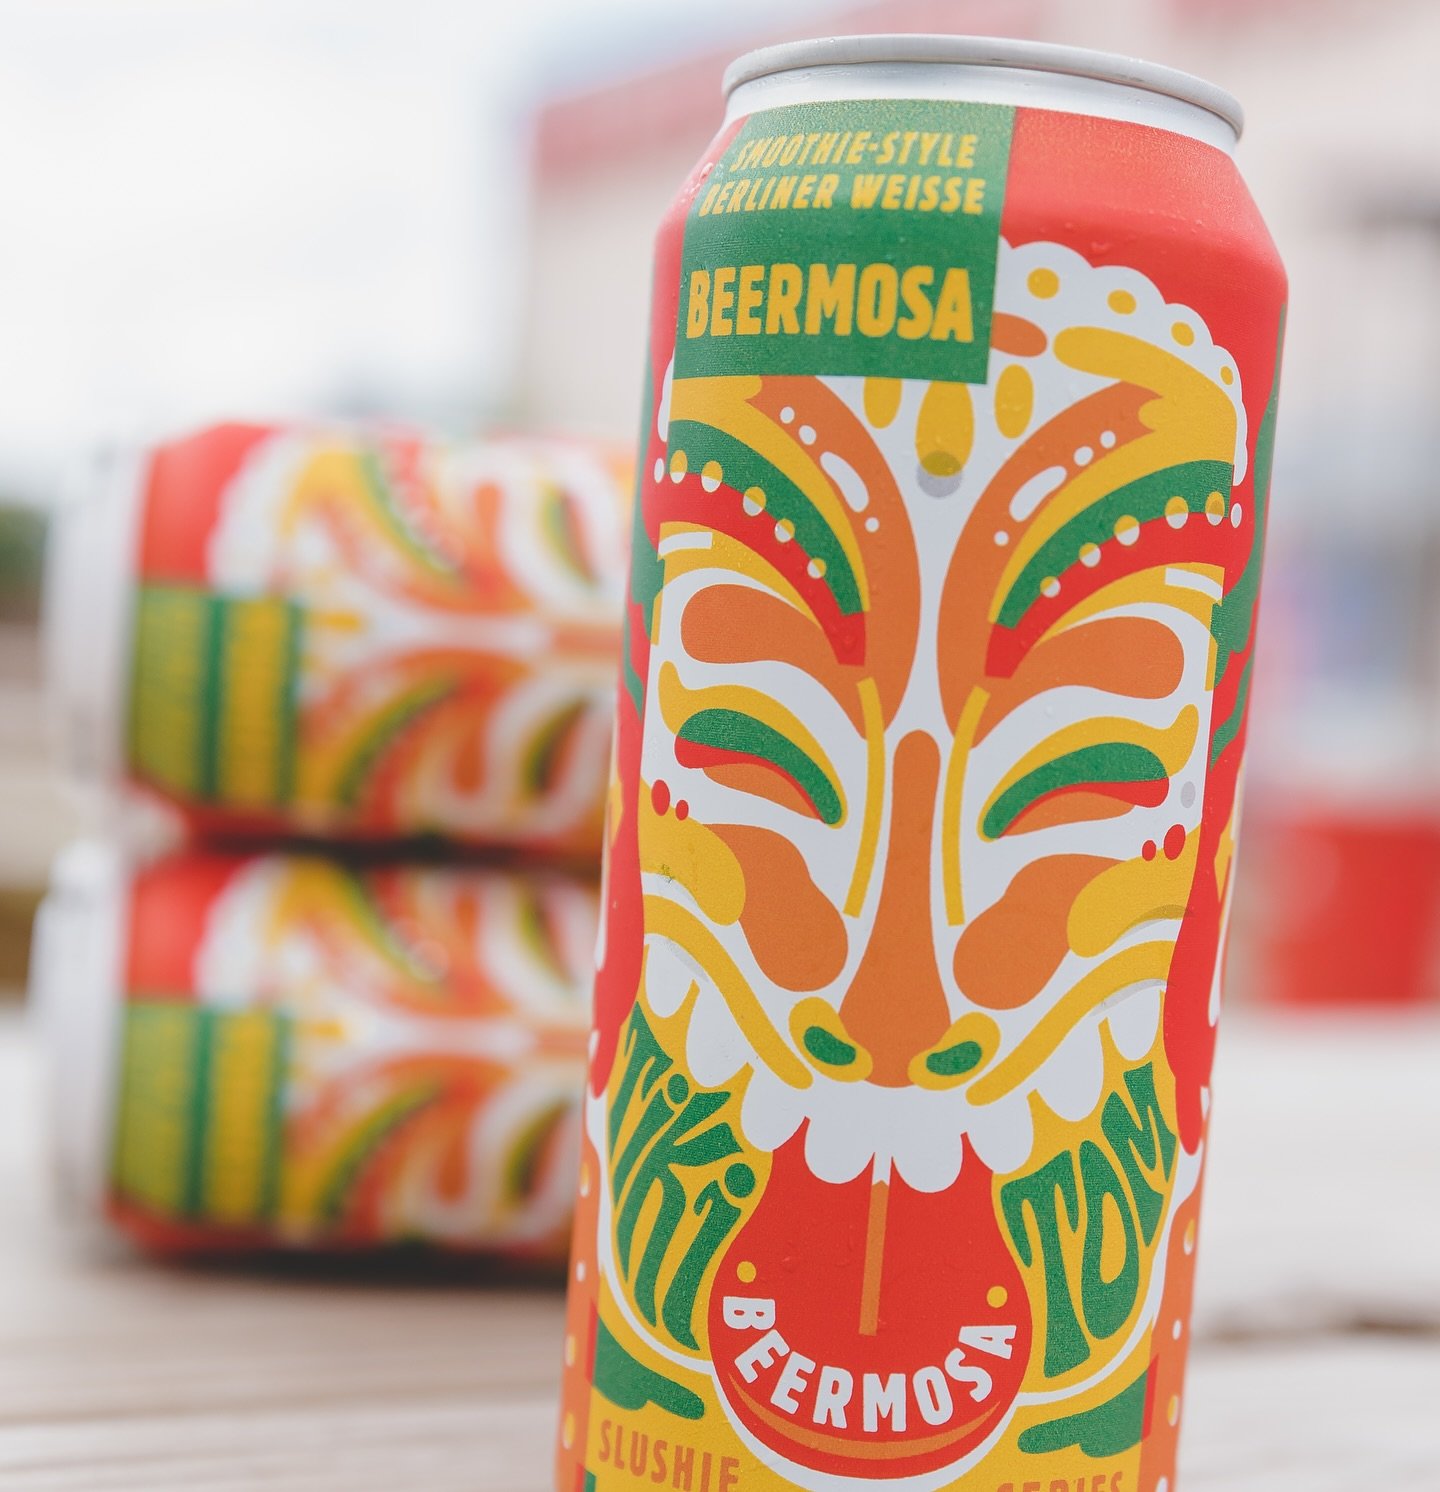 When we created Beermosa it was with Sundays in mind. What evolved from a splash of OJ in our house made Witbier evolved into this fruited sour created with four different types of oranges. We took the mimosa and made it as Wisconsin as it could be. 